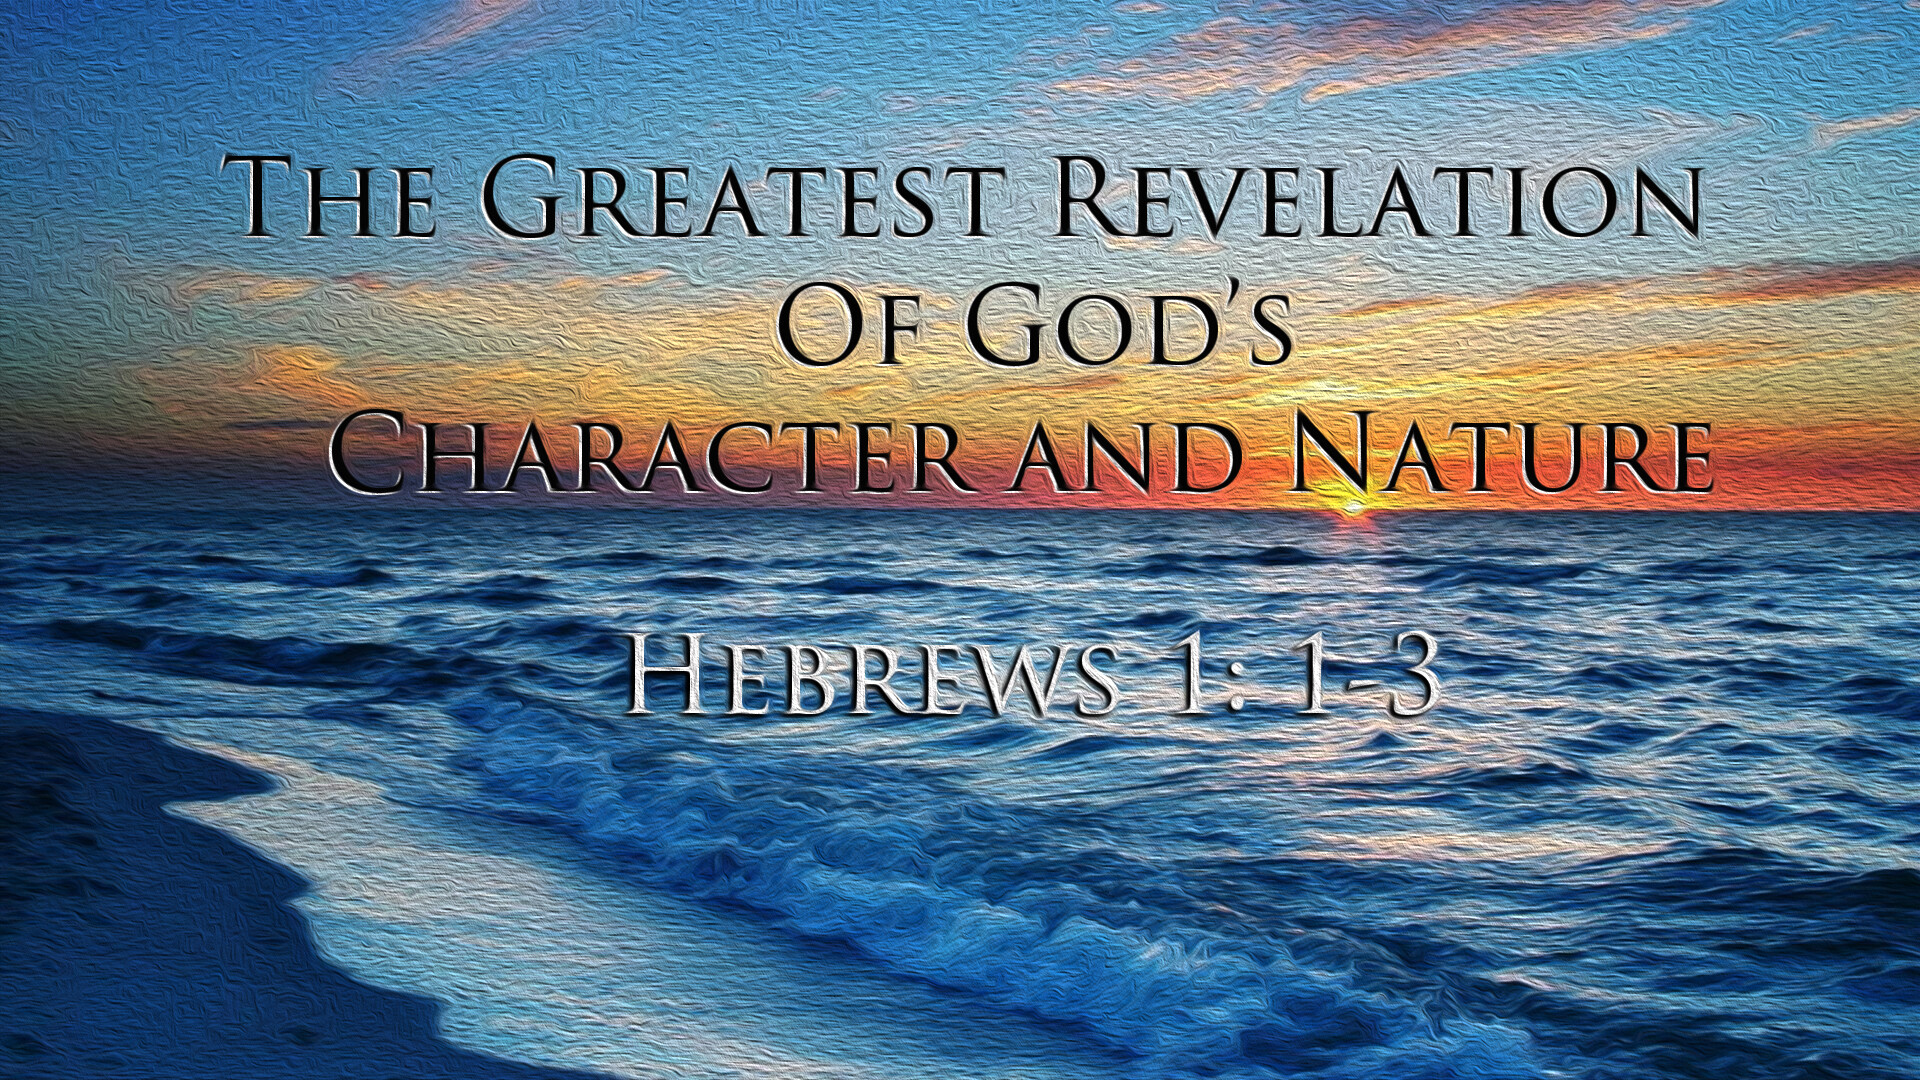 The Greatest Revelation Of God's Character And Nature